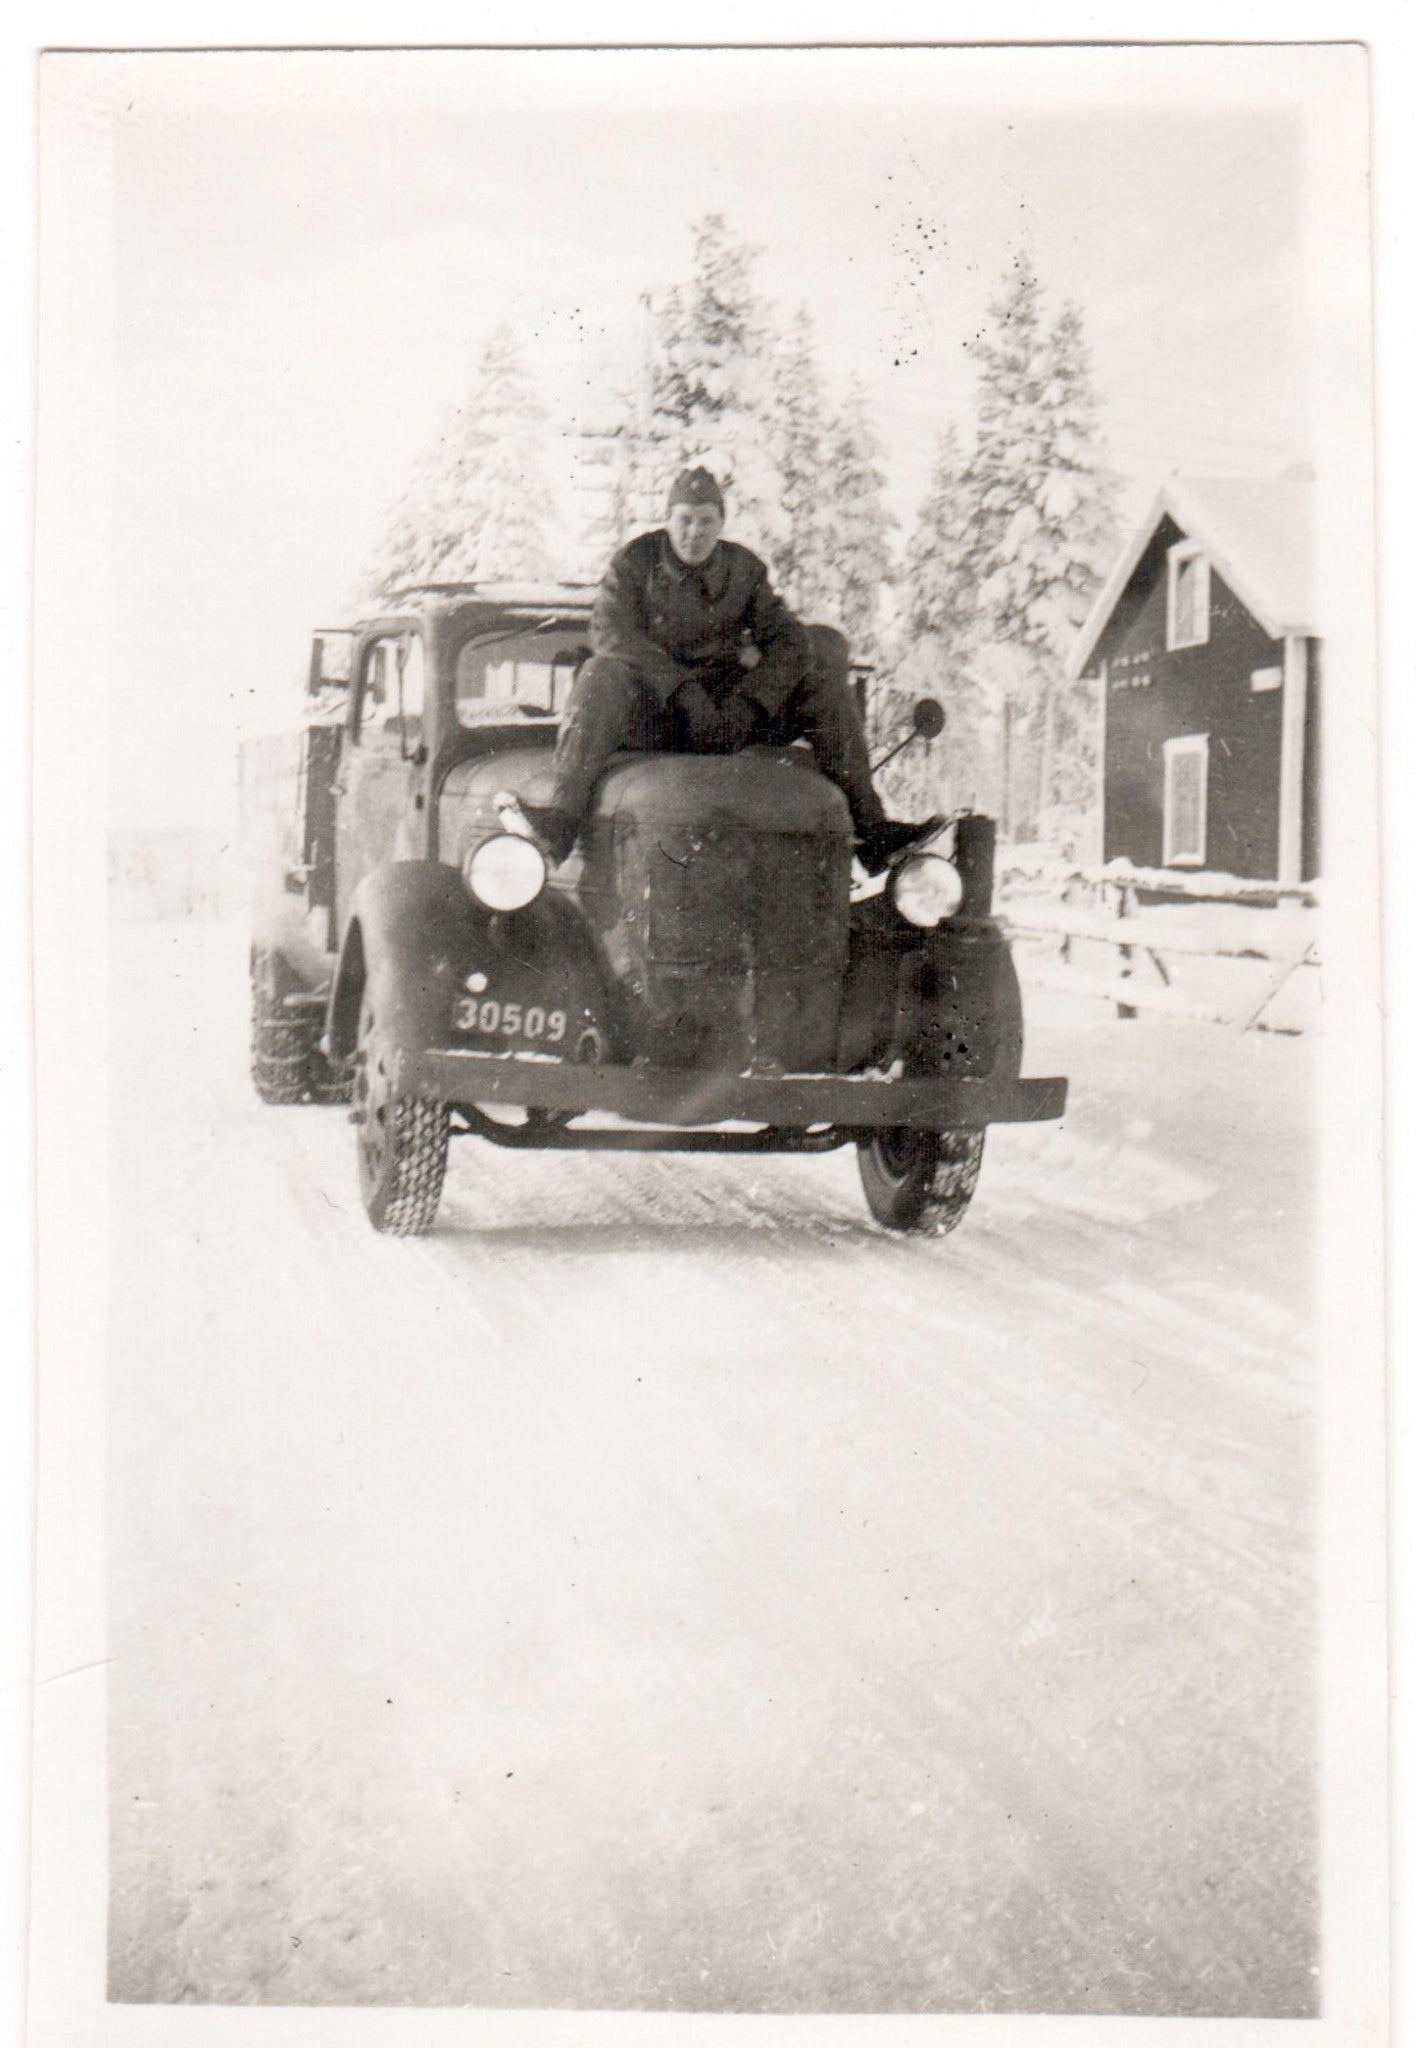 Vintage Photography - Portrait of Man - Winter Photo - Photo of Old Car - Sweden